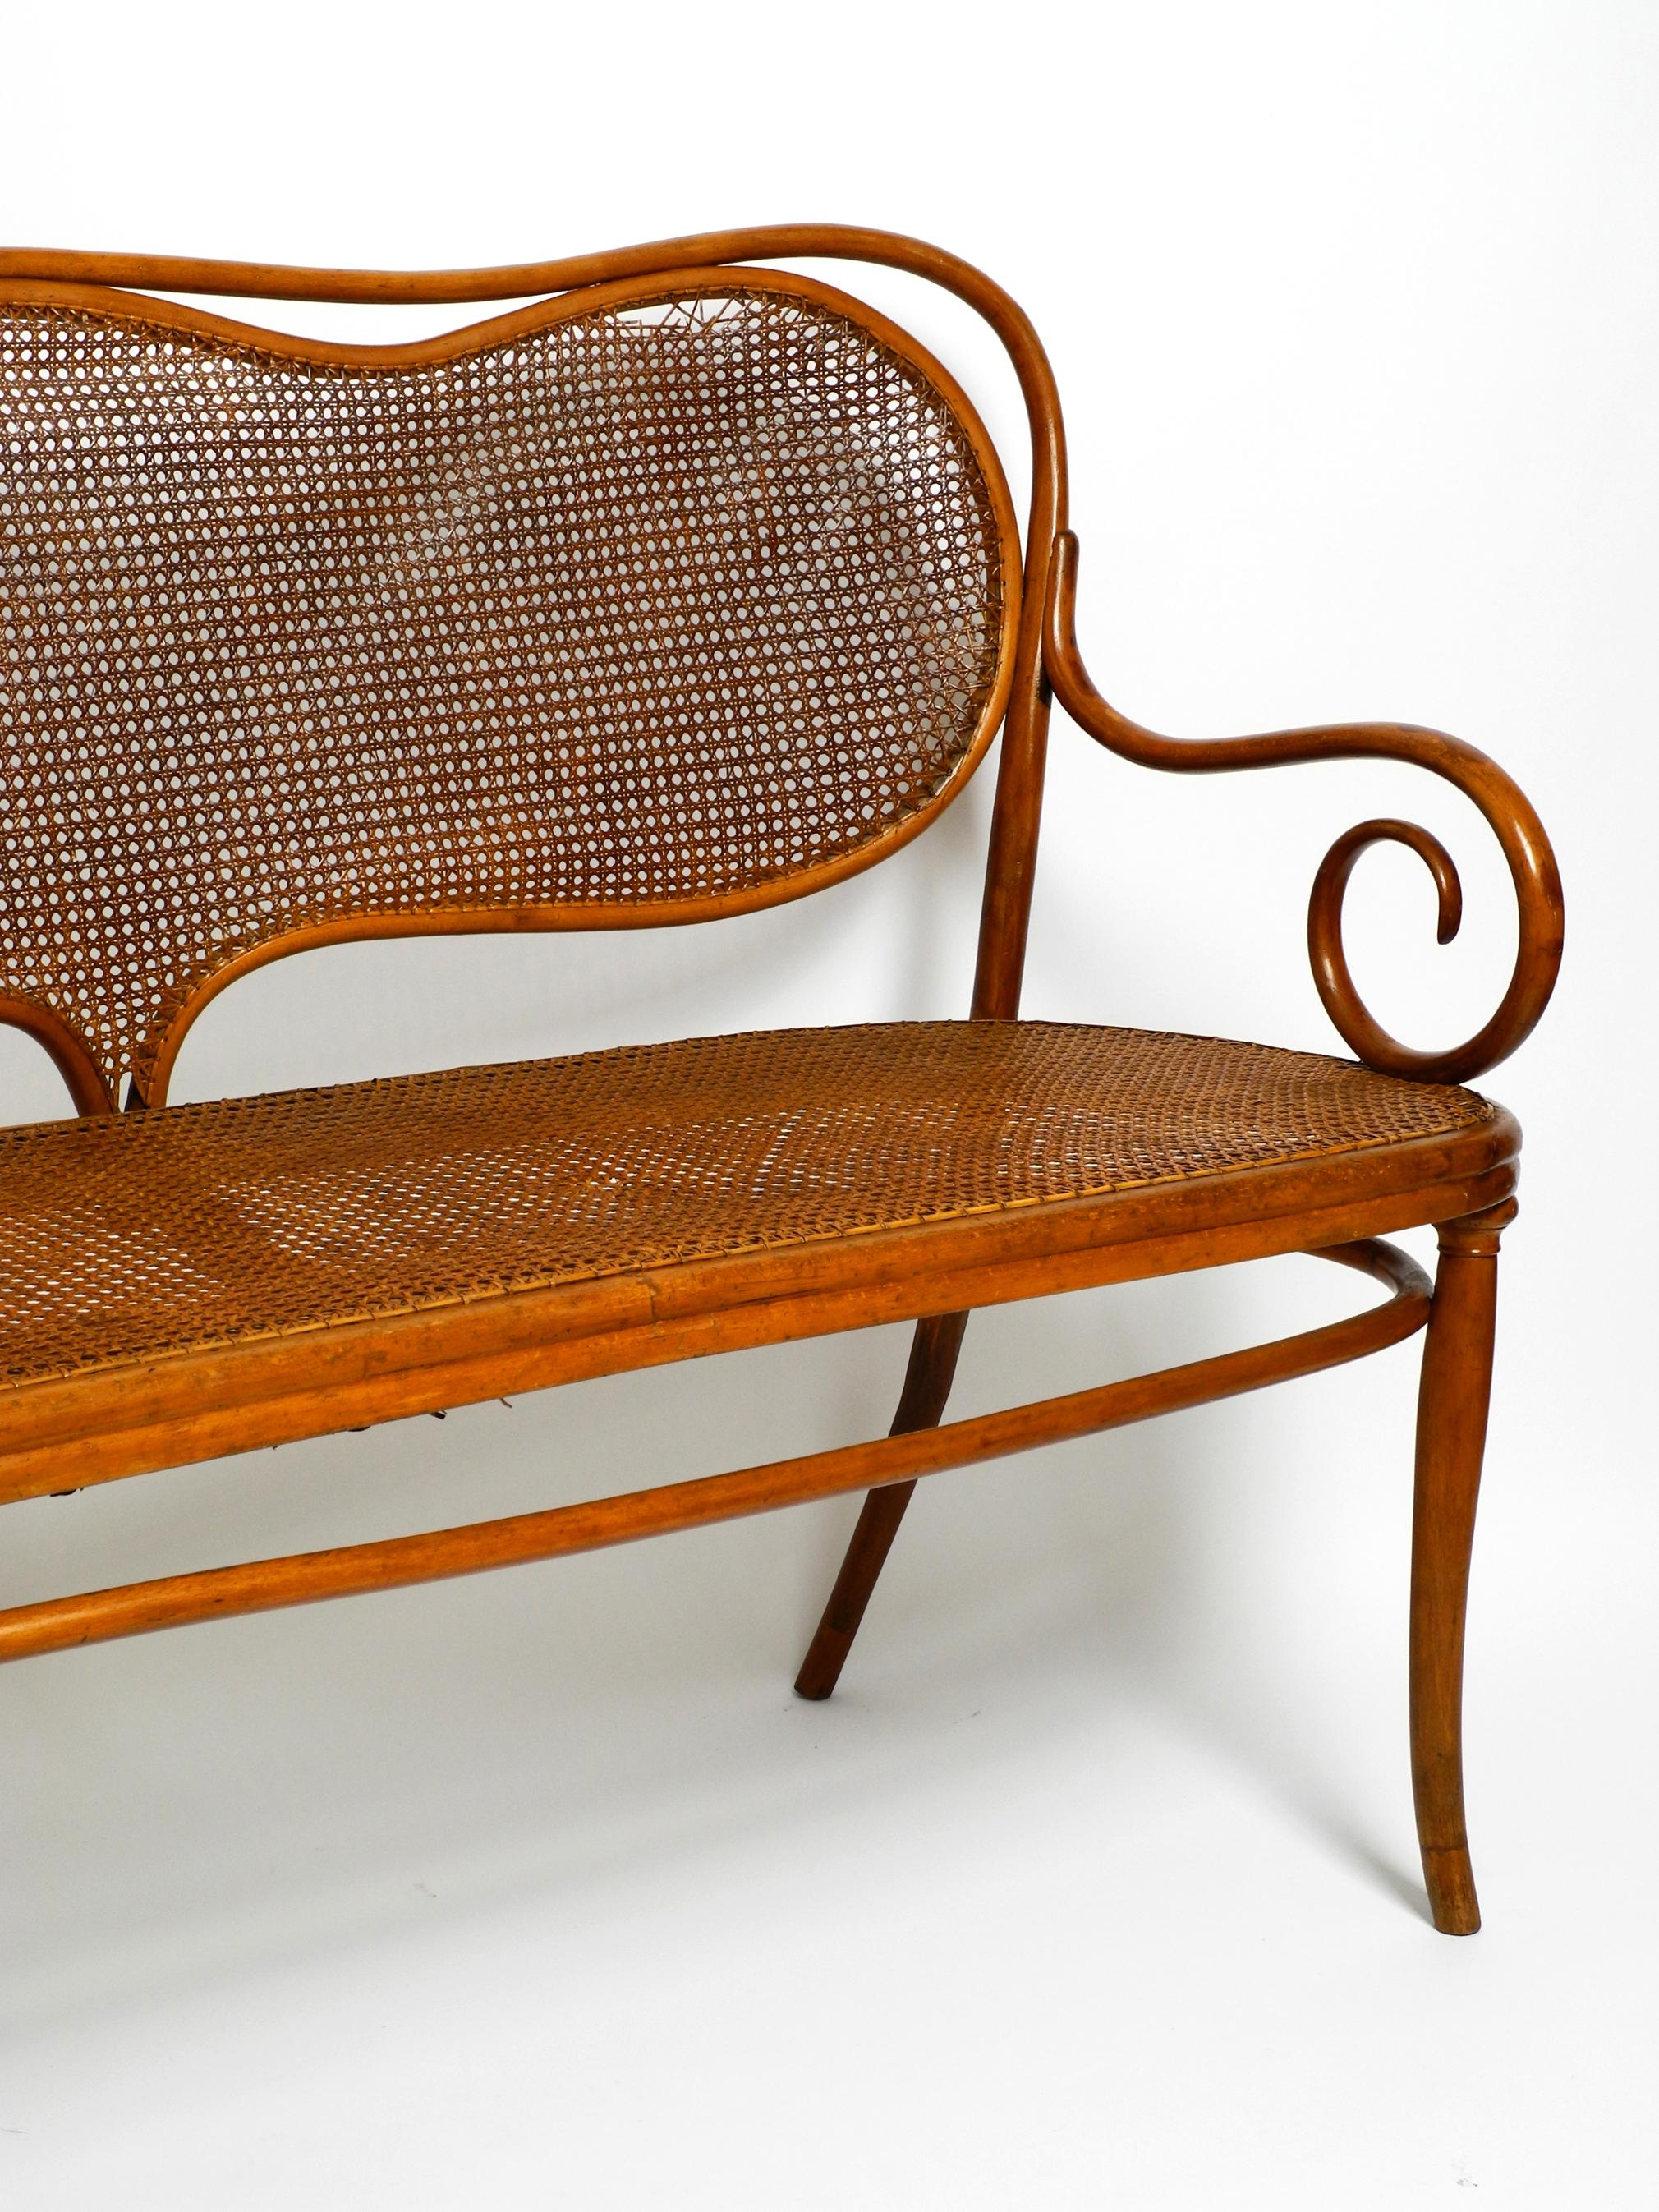 Bench No. 5 Thonet 1858 made of bent beech and wickerwork  restoration needed For Sale 12